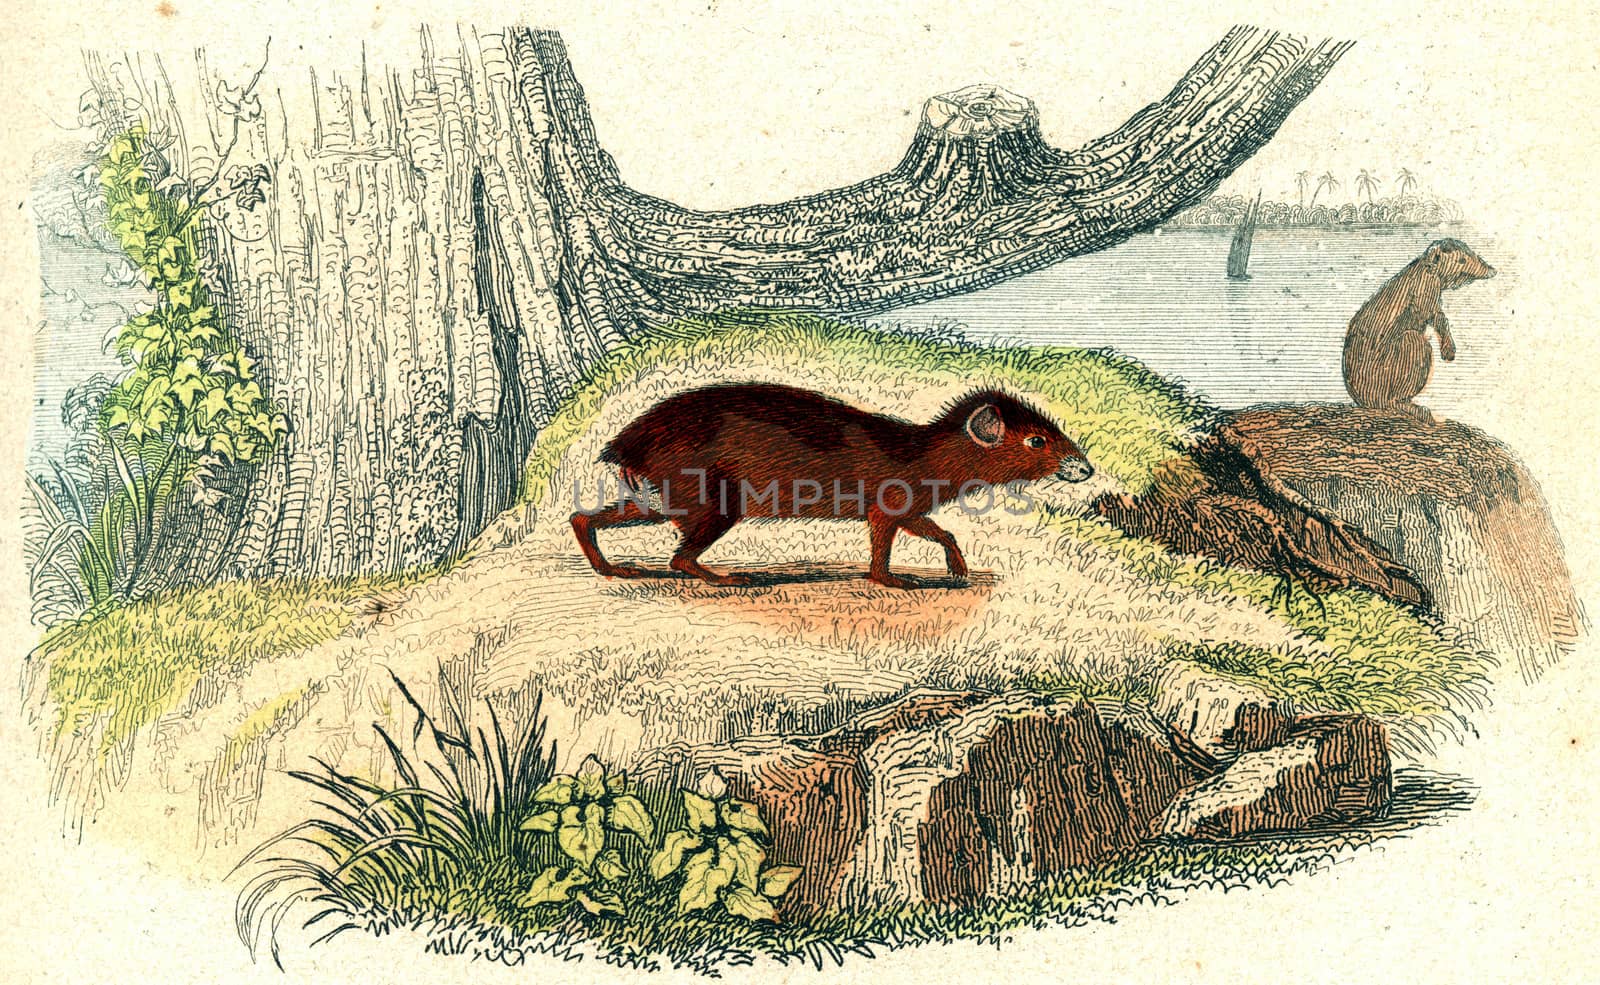 The agouti, vintage engraved illustration. From Buffon Complete Work.
